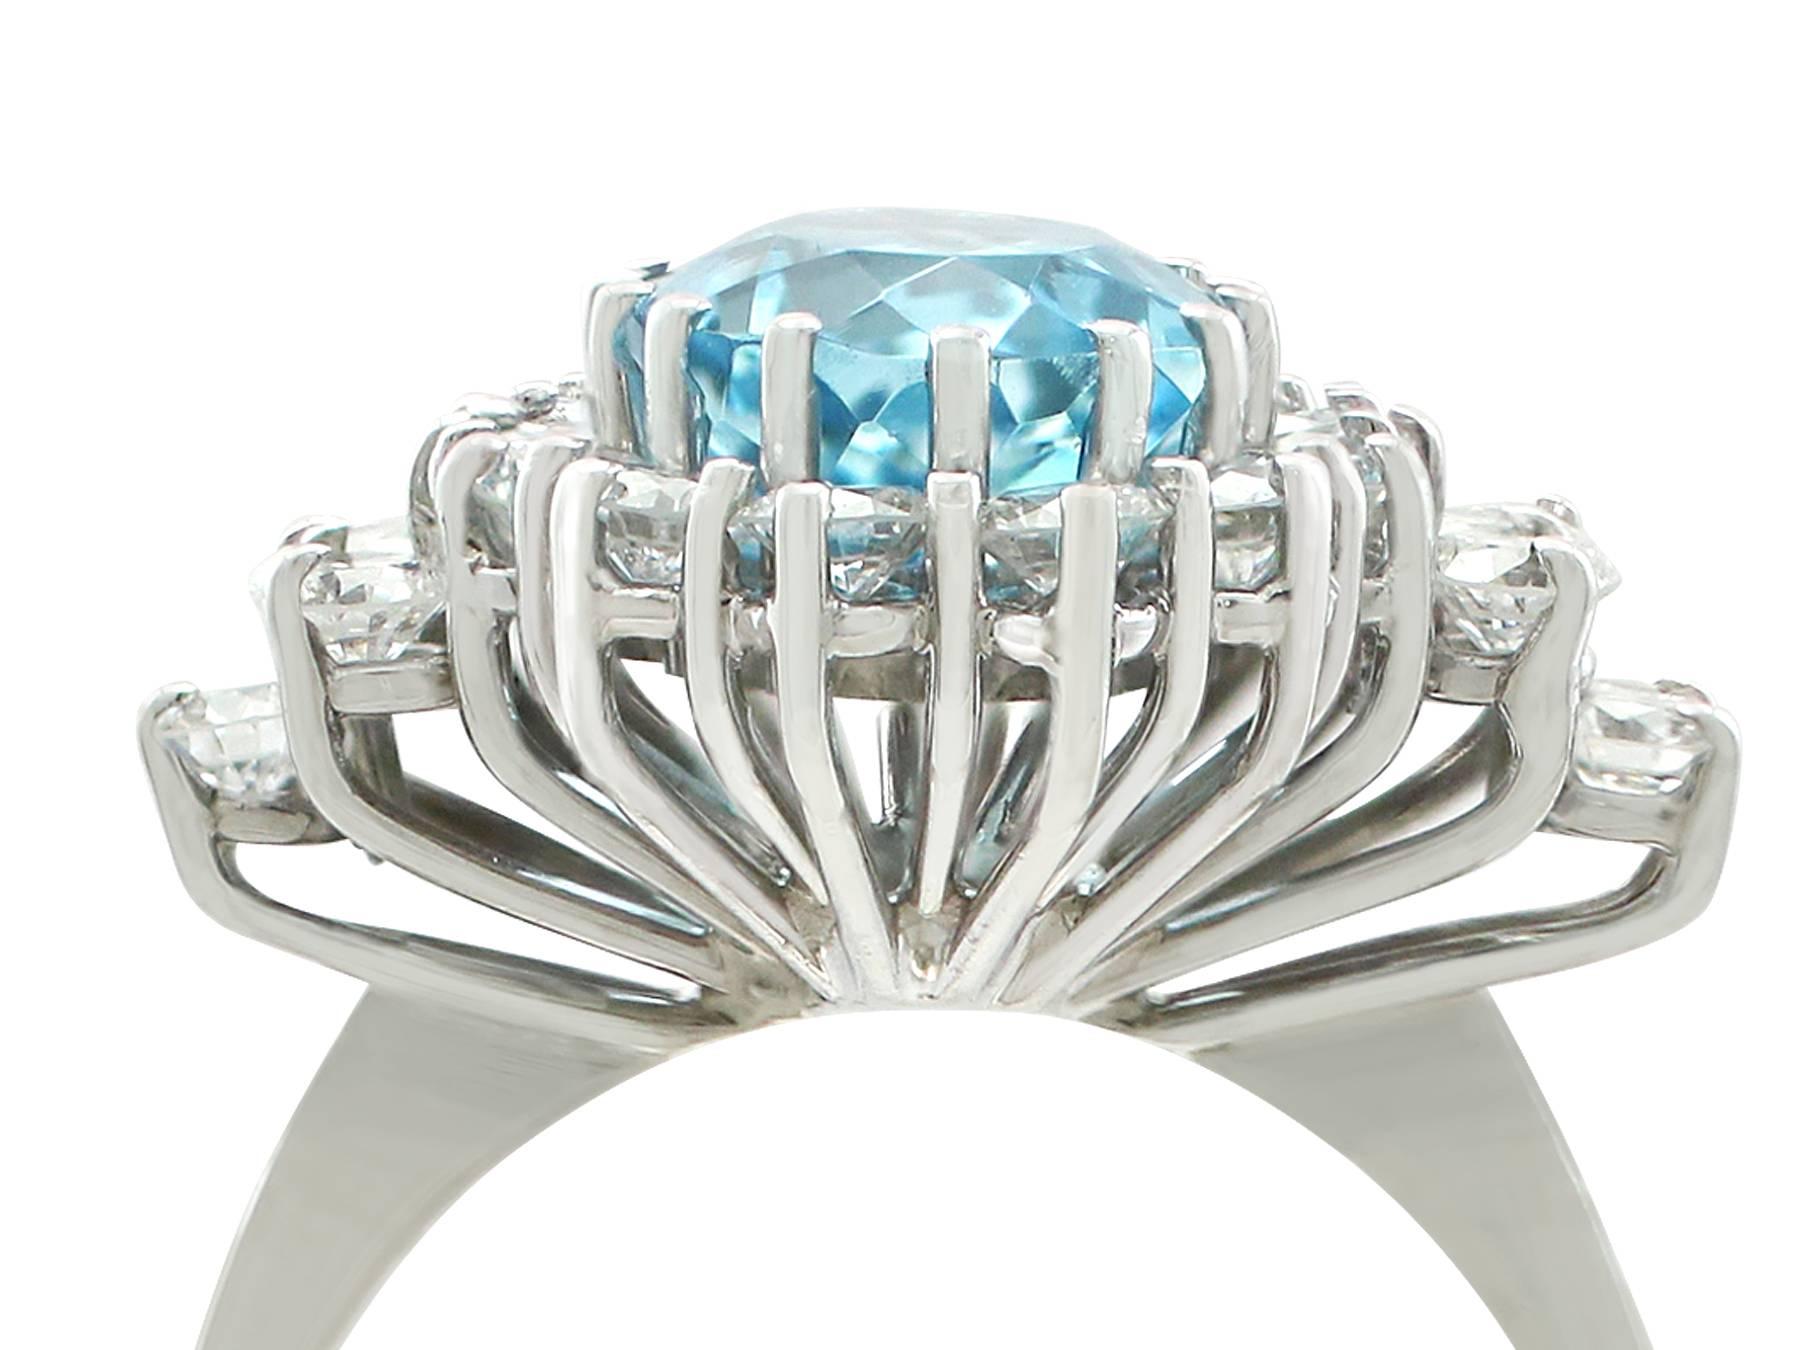 An impressive vintage 3.59 carat aquamarine and 1.00 carat diamond, 14 karat white gold cluster ring; part of our diverse gemstone jewelry and estate jewelry collections

This fine and impressive aquamarine and diamond ring has been crafted in 14k